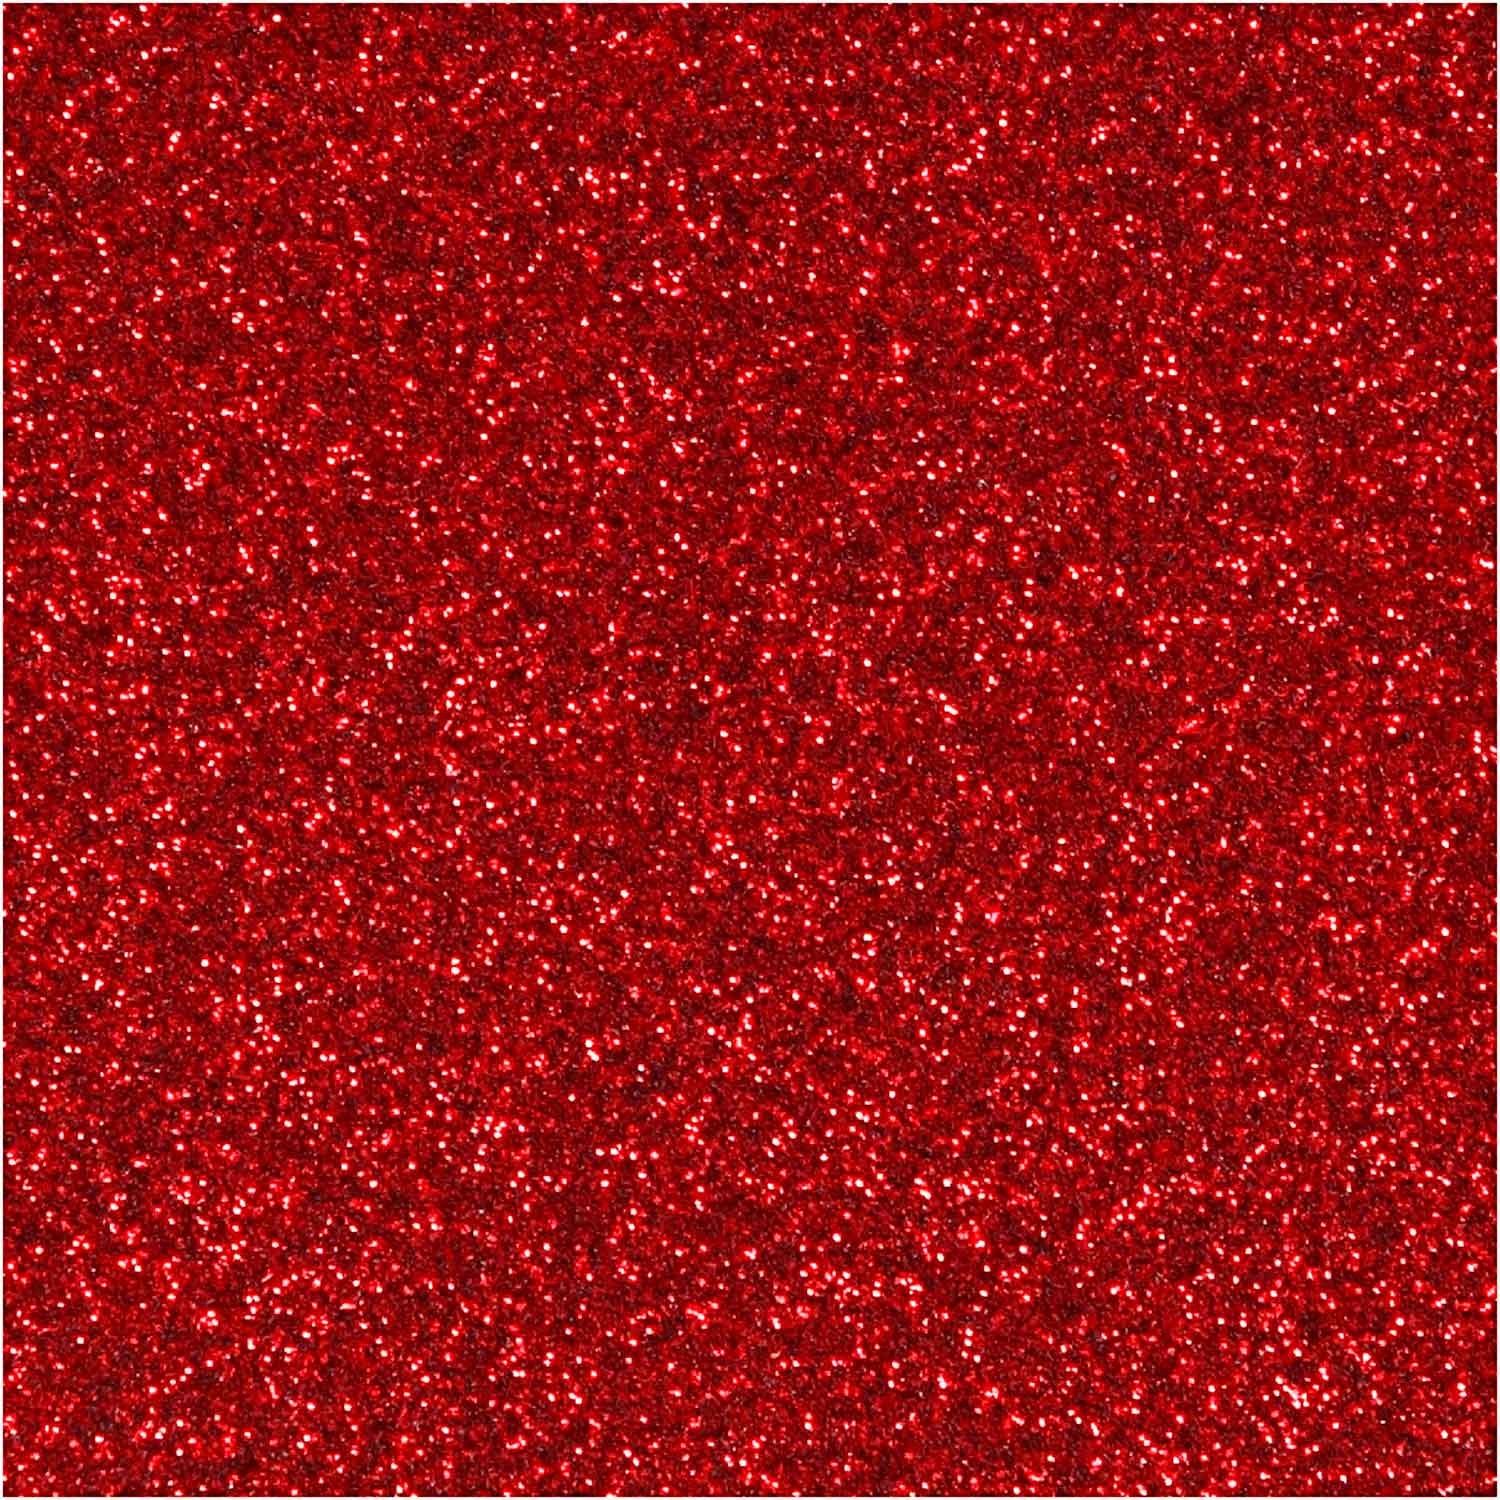 Film thermocollant Glitter Rouge, A5